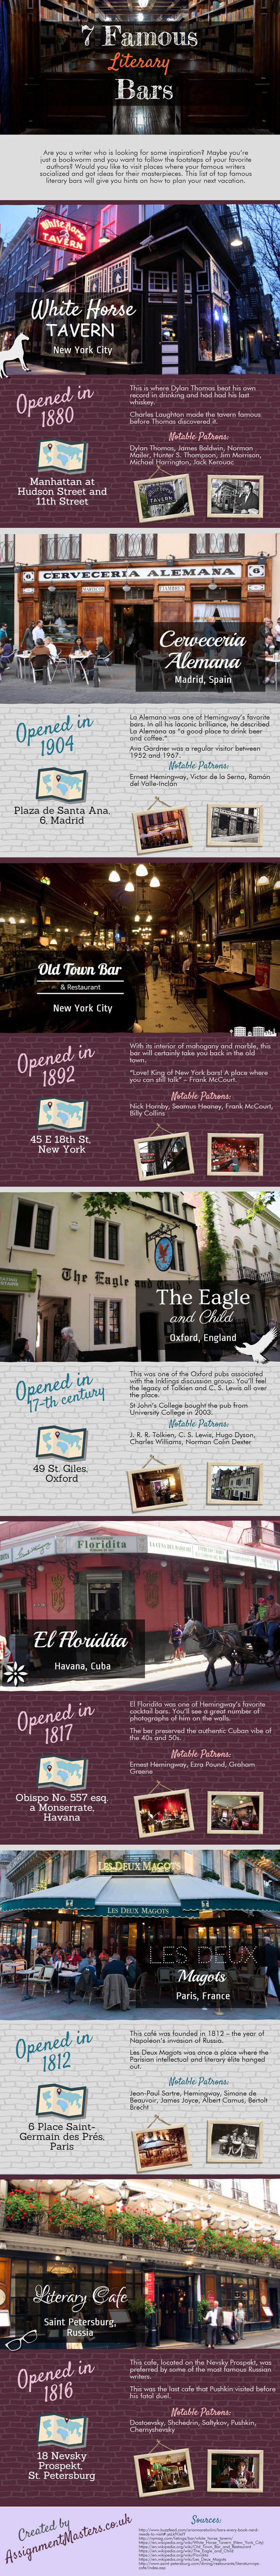 Infographic: Top 7 Famous Literary Bars You Should Visit